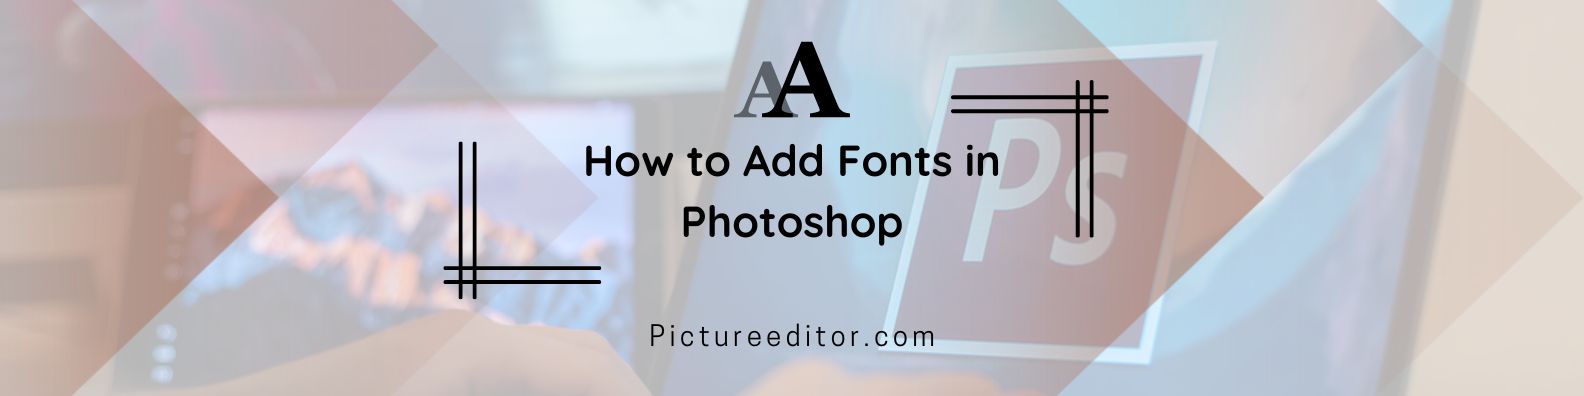 How to Add Fonts in Photoshop